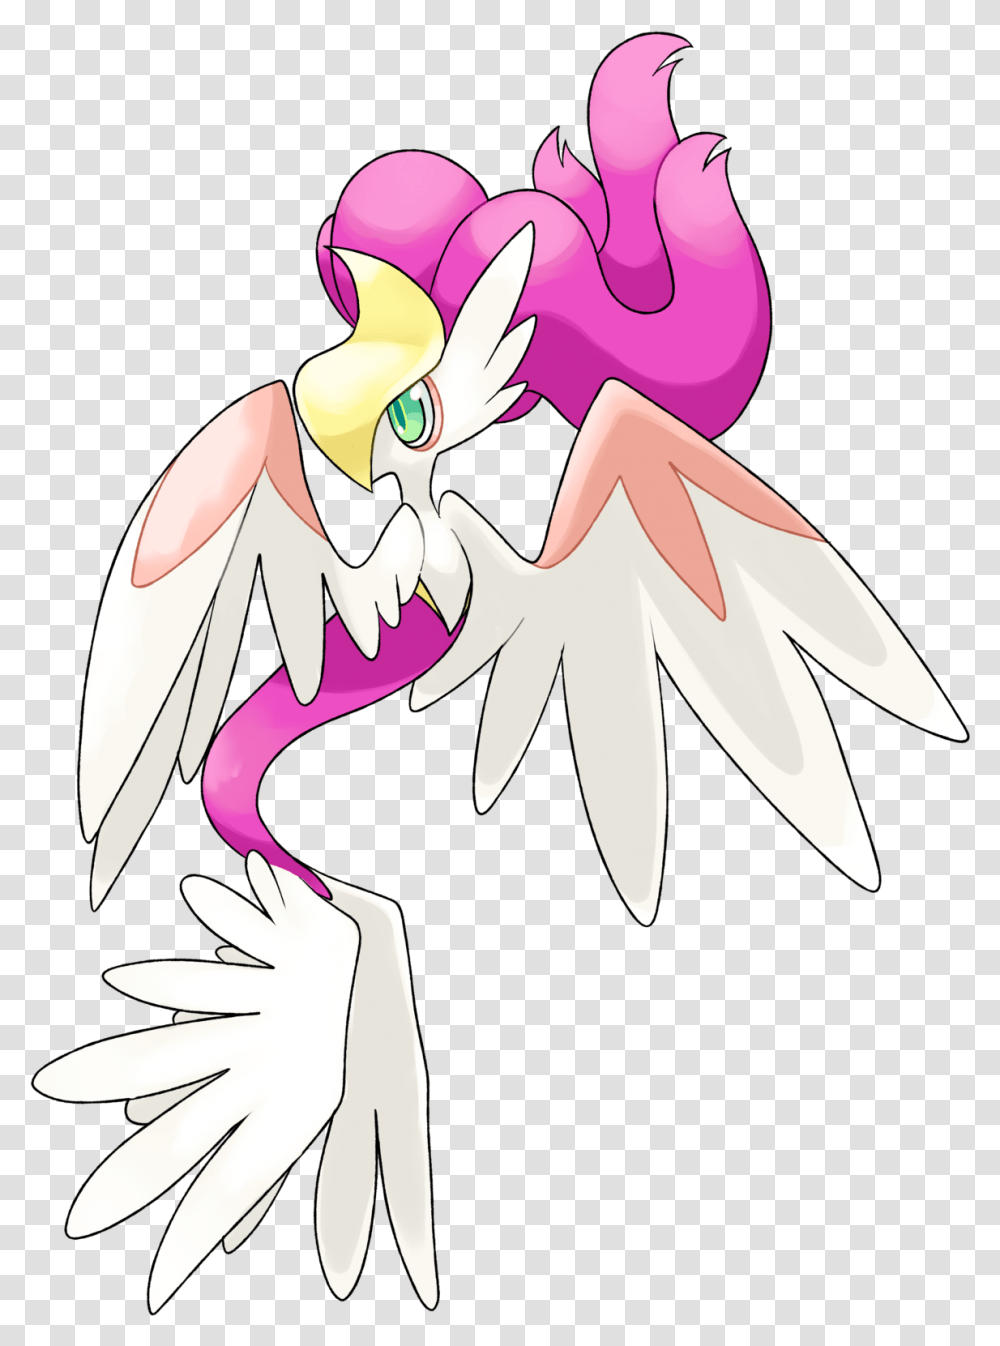 Sirender The Temptress Pokemonhere Is Another Legendary Fake Flying Type Pokemon, Angel, Archangel, Person Transparent Png